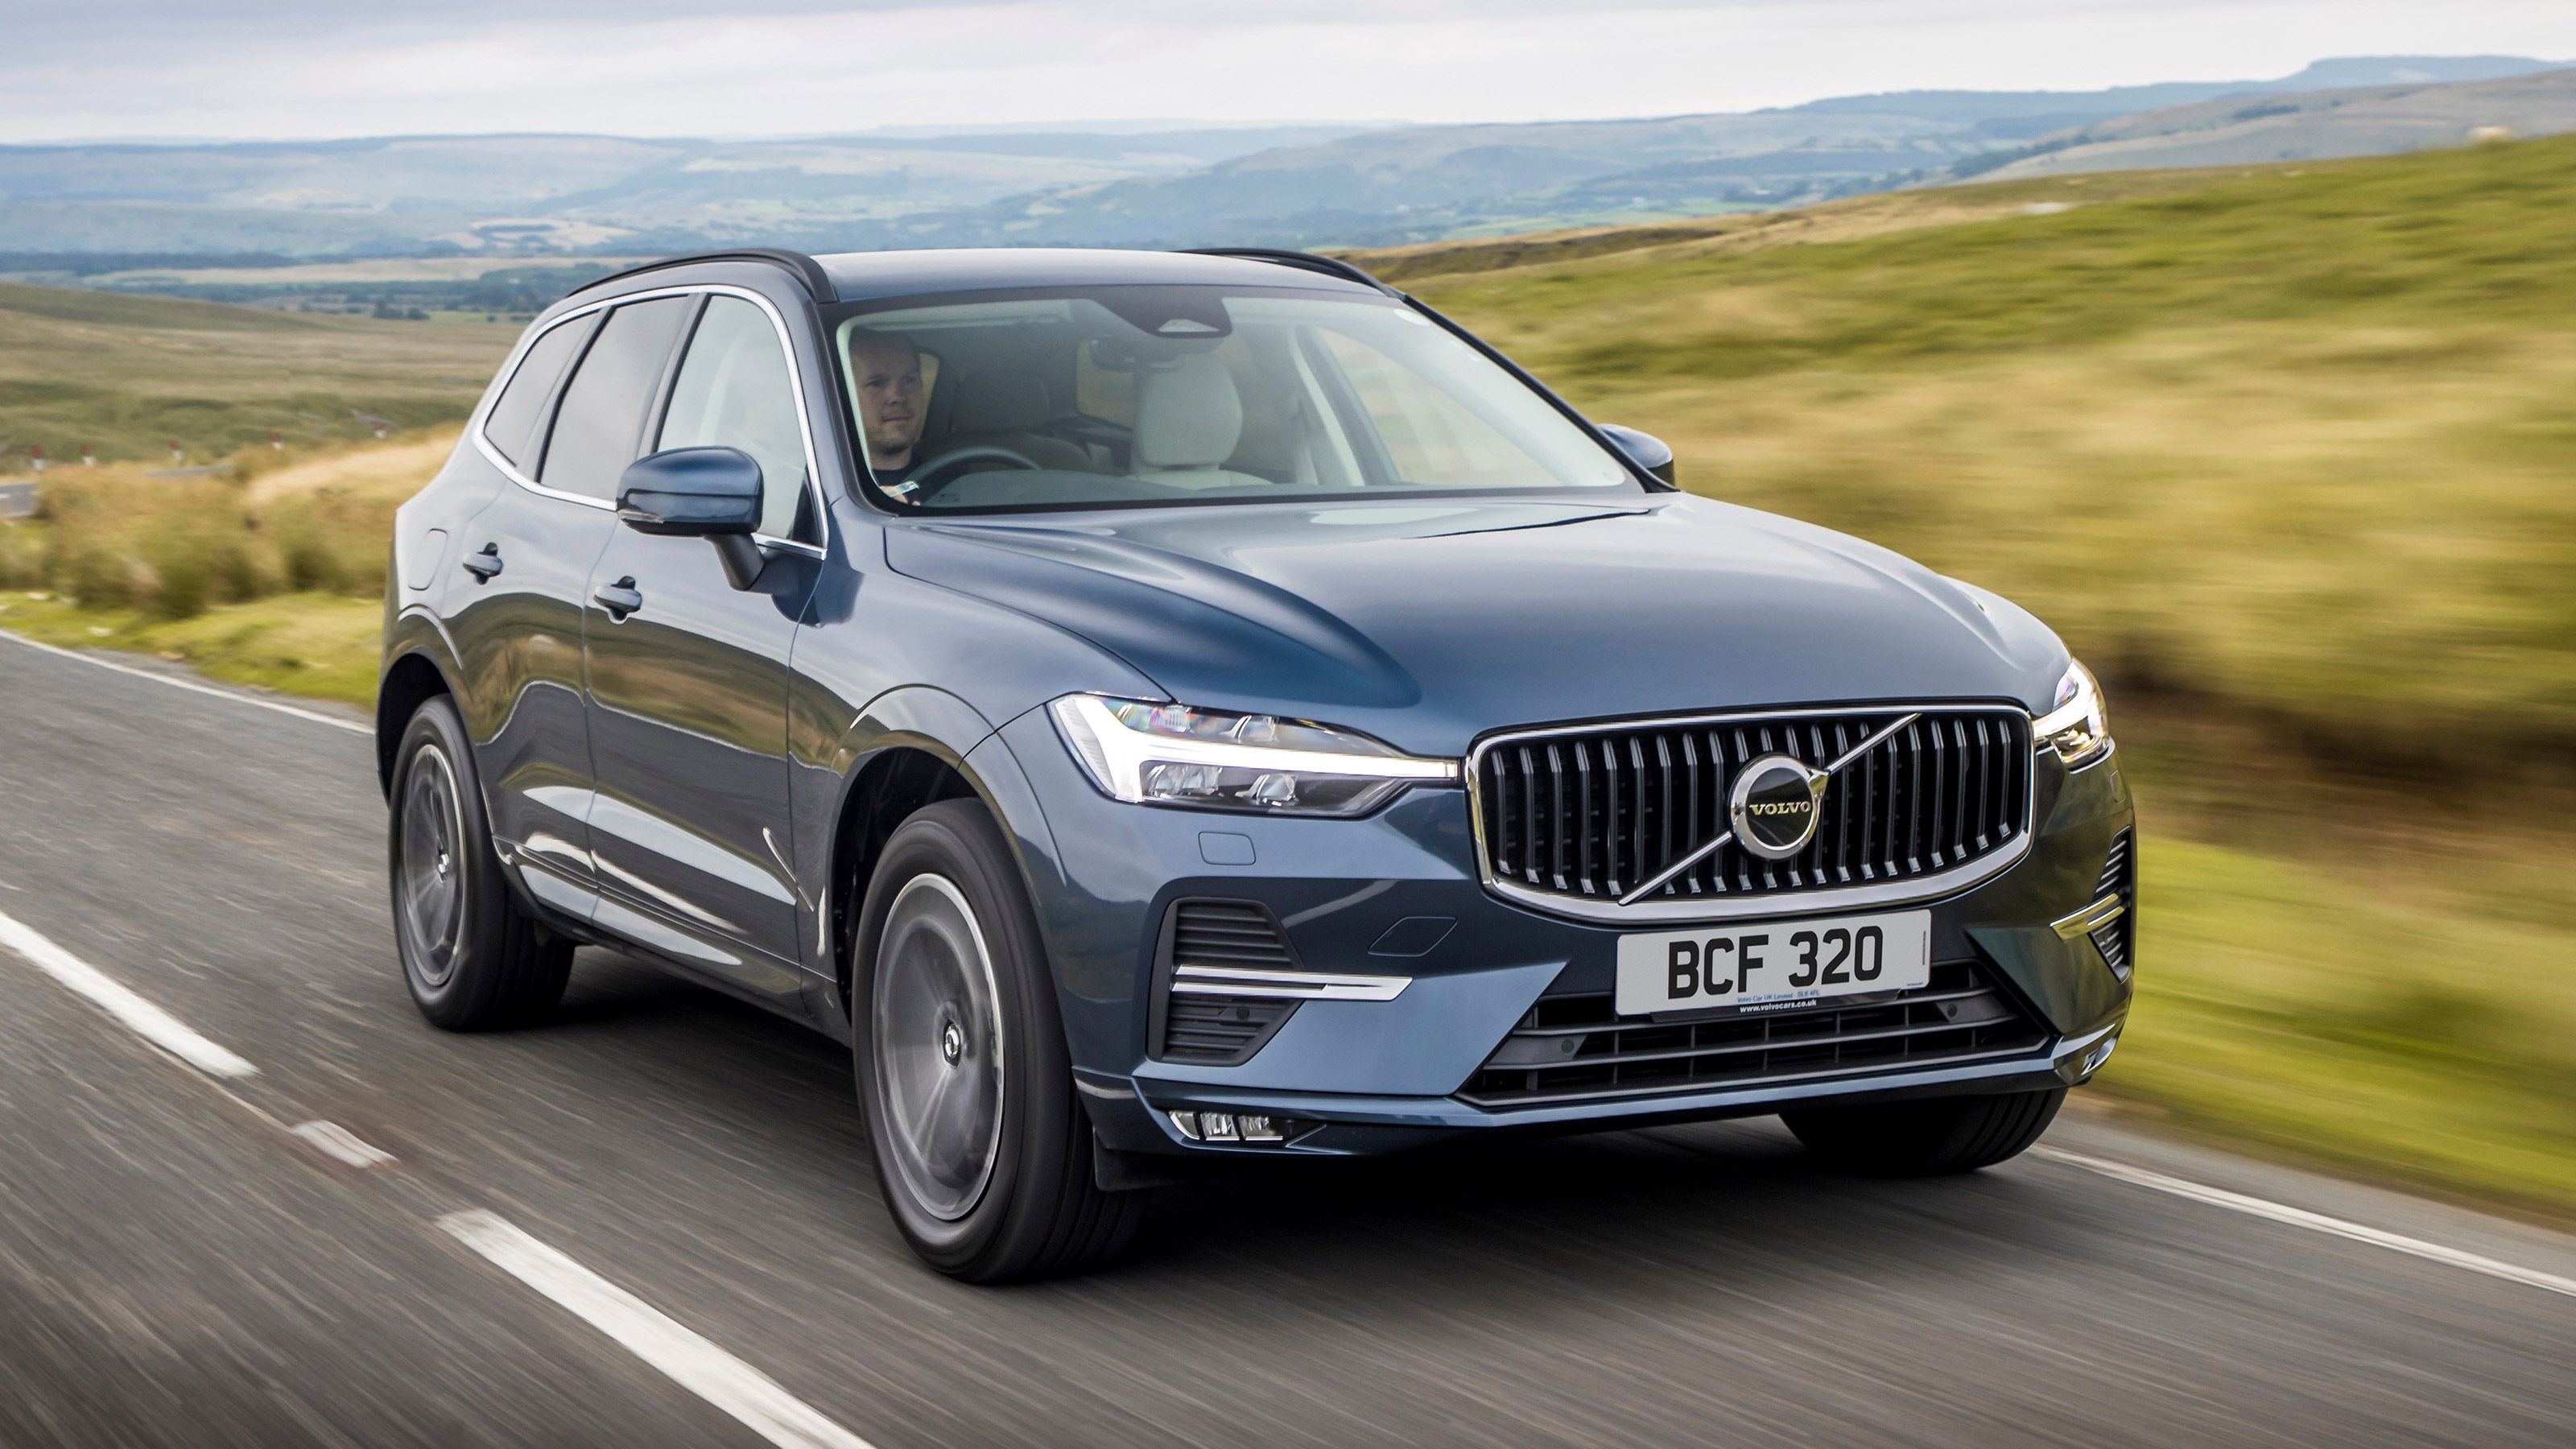 https://mediacloud.carbuyer.co.uk/image/private/s--dyTUBuhz--/v1633099787/carbuyer/2021/10/Volvo%20XC60%20SUV%20review%202021%20-18.jpg